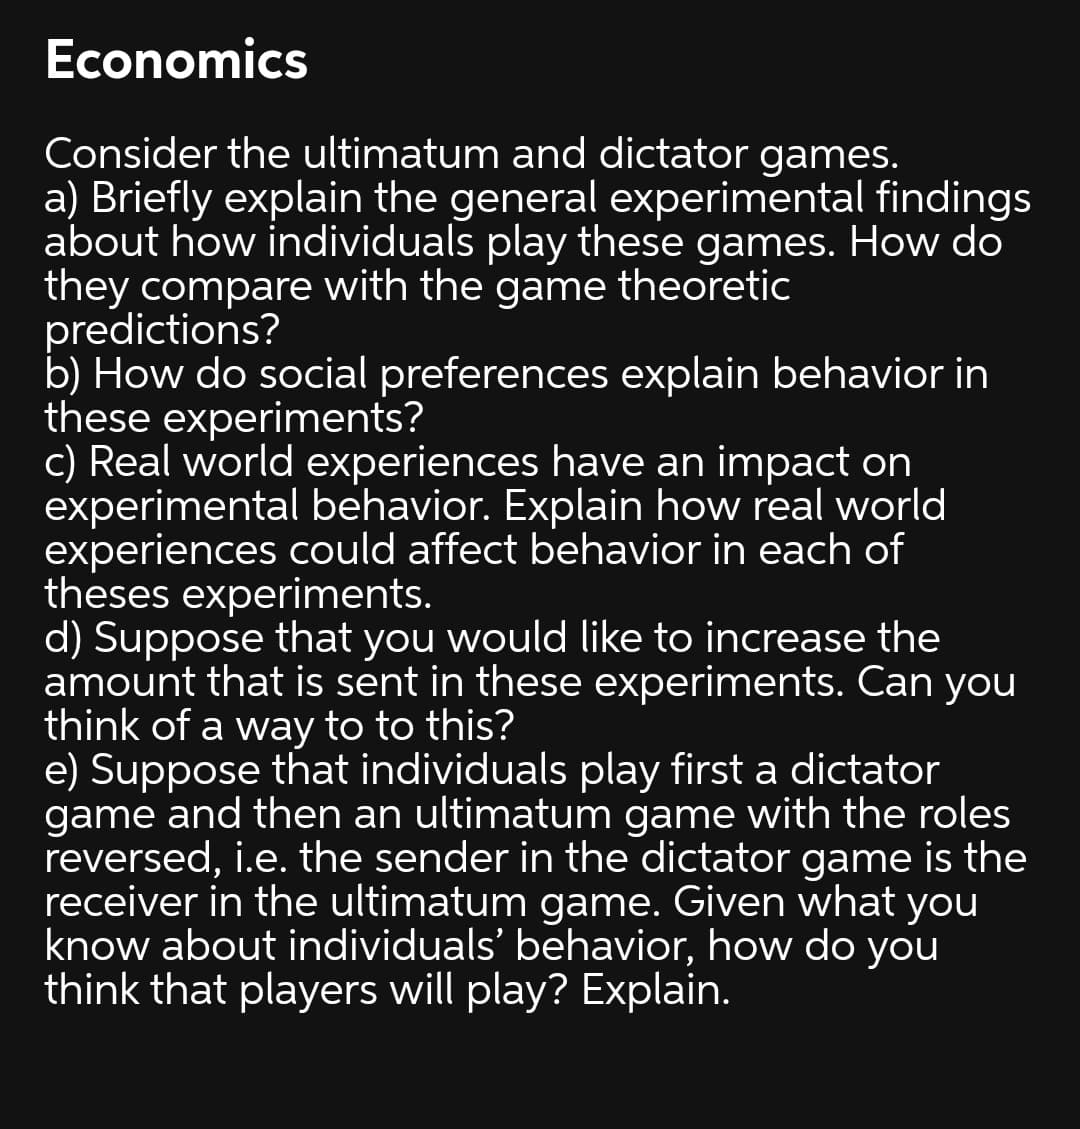 Economics
Consider the ultimatum and dictator games.
a) Briefly explain the general experimental findings
about how individuals play these games. How do
they compare with the game theoretic
predictions?
b) How do social preferences explain behavior in
these experiments?
c) Real world experiences have an impact on
experimental behavior. Explain how real world
experiences could affect behavior in each of
theses experiments.
d) Suppose that you would like to increase the
amount that is sent in these experiments. Can you
think of a way to to this?
e) Suppose that individuals play first a dictator
game and then an ultimatum game with the roles
reversed, i.e. the sender in the dictator game is the
receiver in the ultimatum game. Given what you
know about individuals' behavior, how do
think that players will play? Explain.
you
